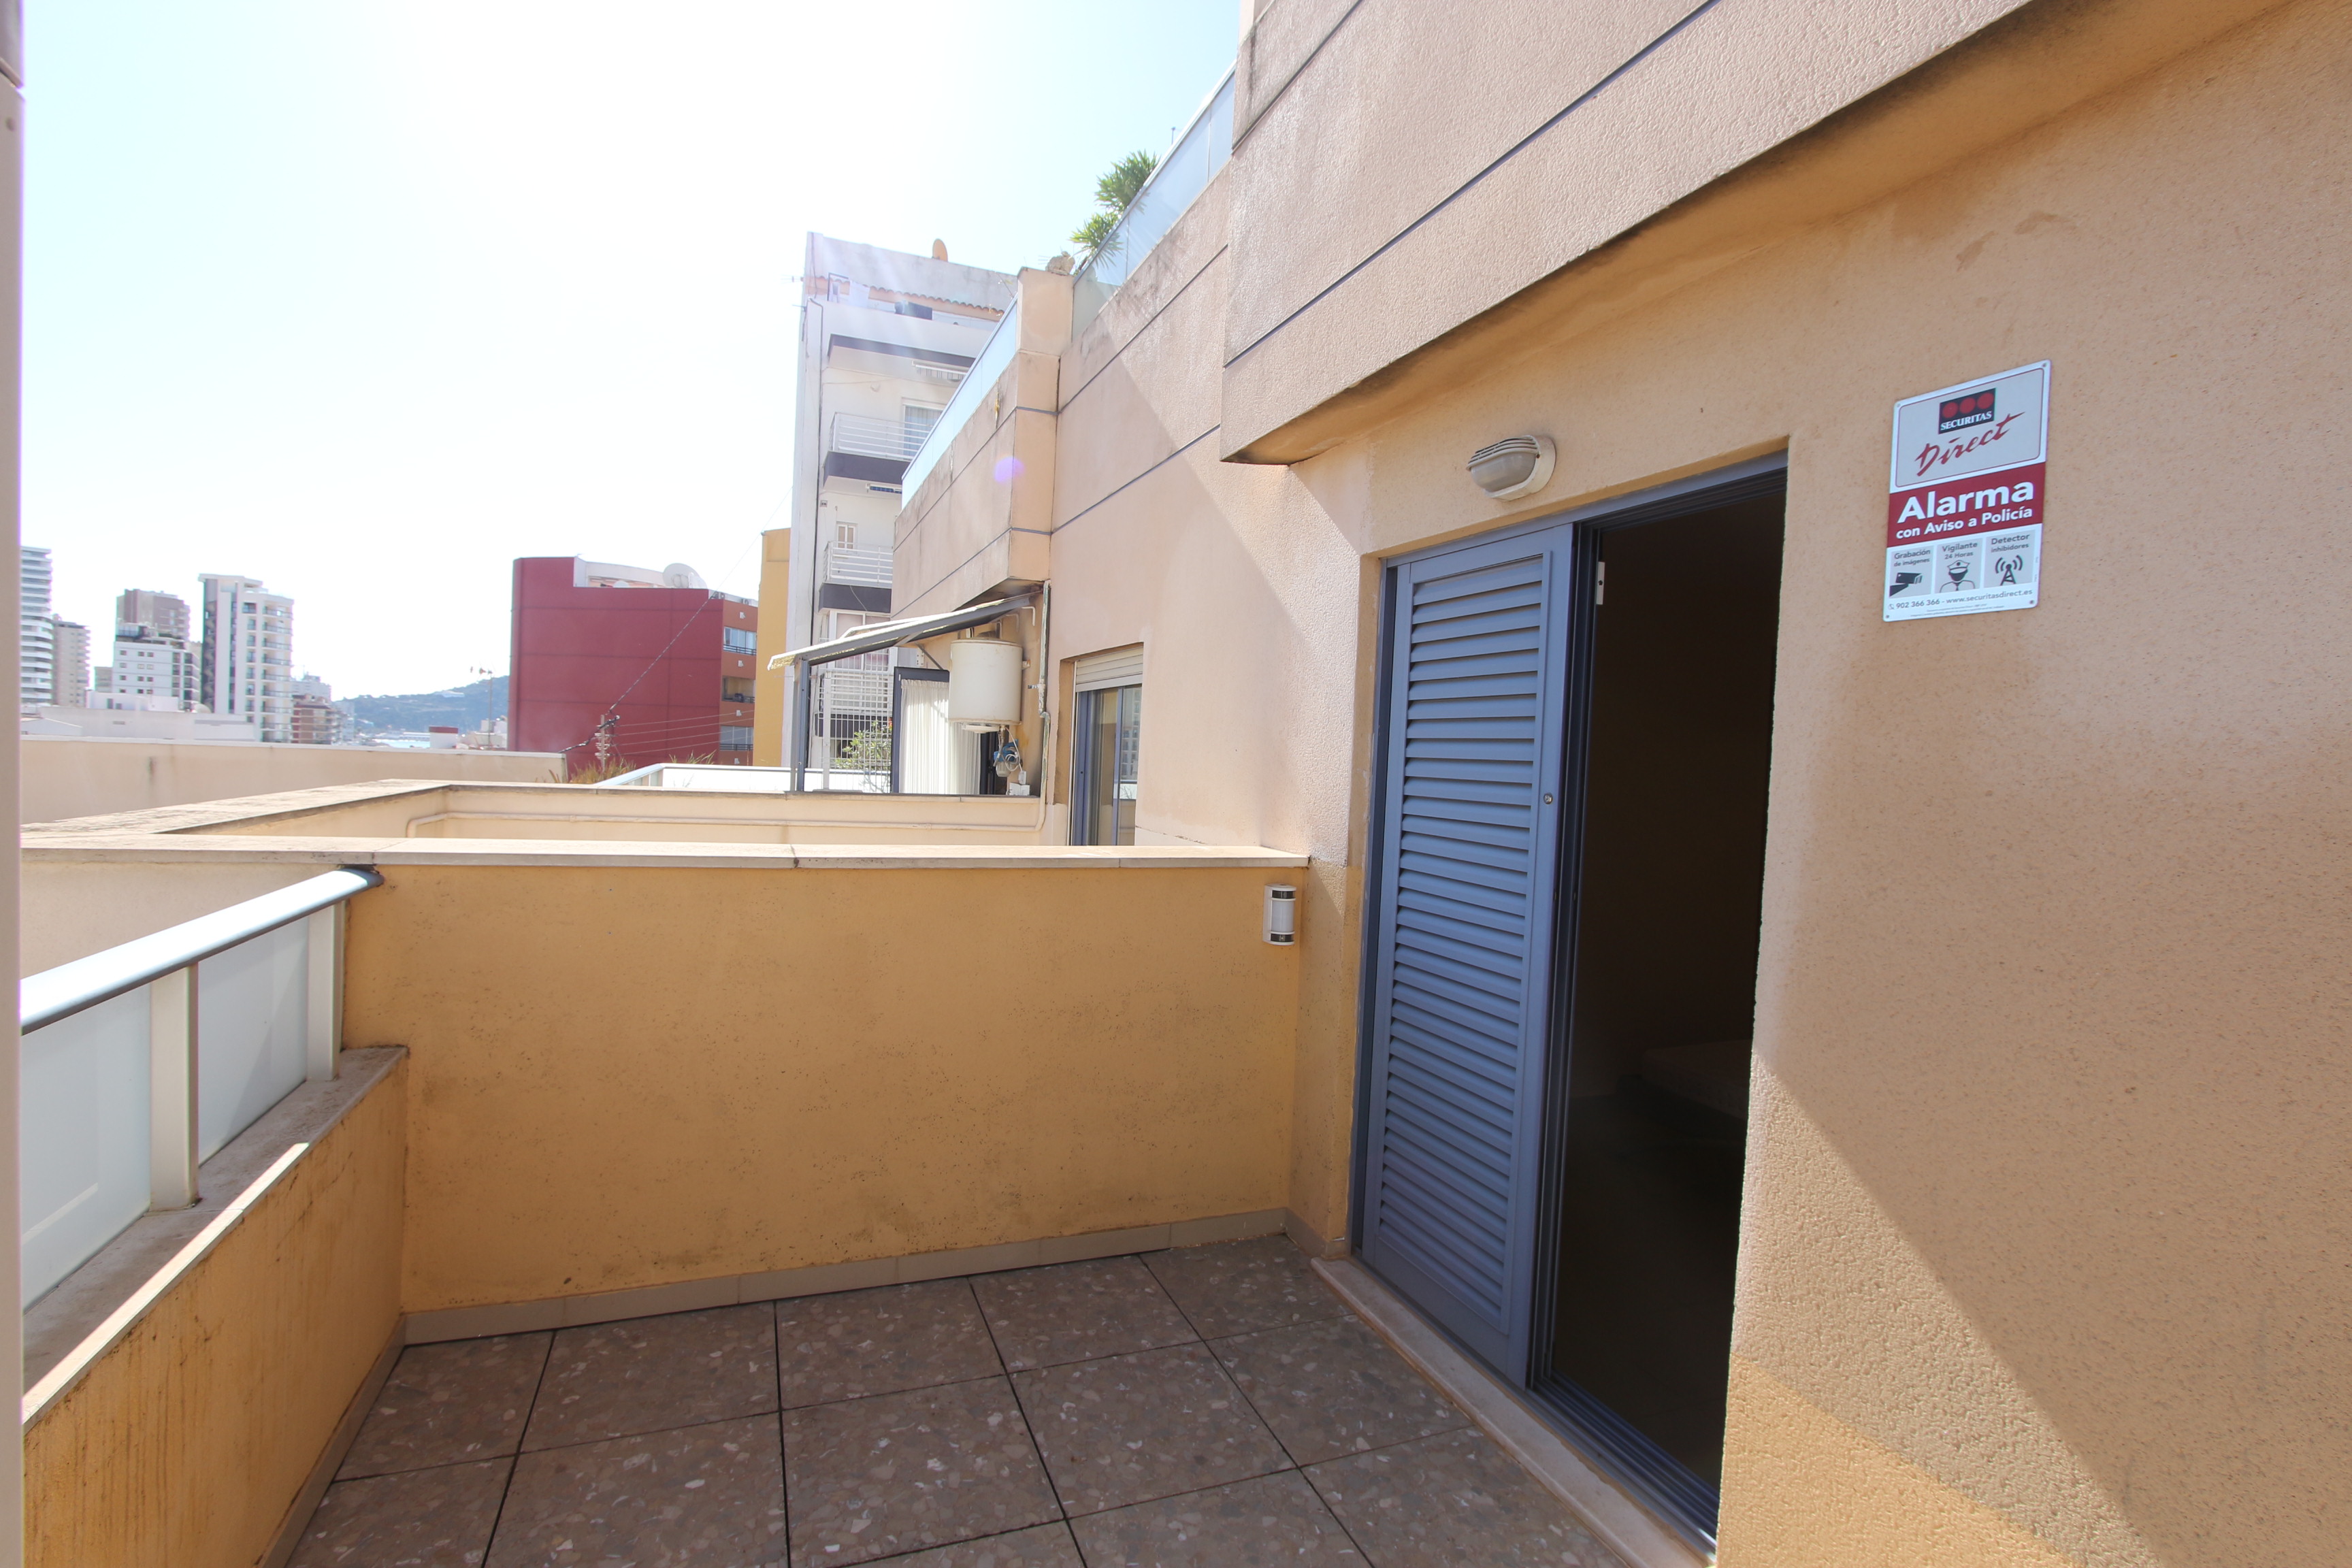 SEMI-PENTHOUSE IN THE CENTER OF CALPE A SHORT DISTANCE FROM THE ARENAL BEACH